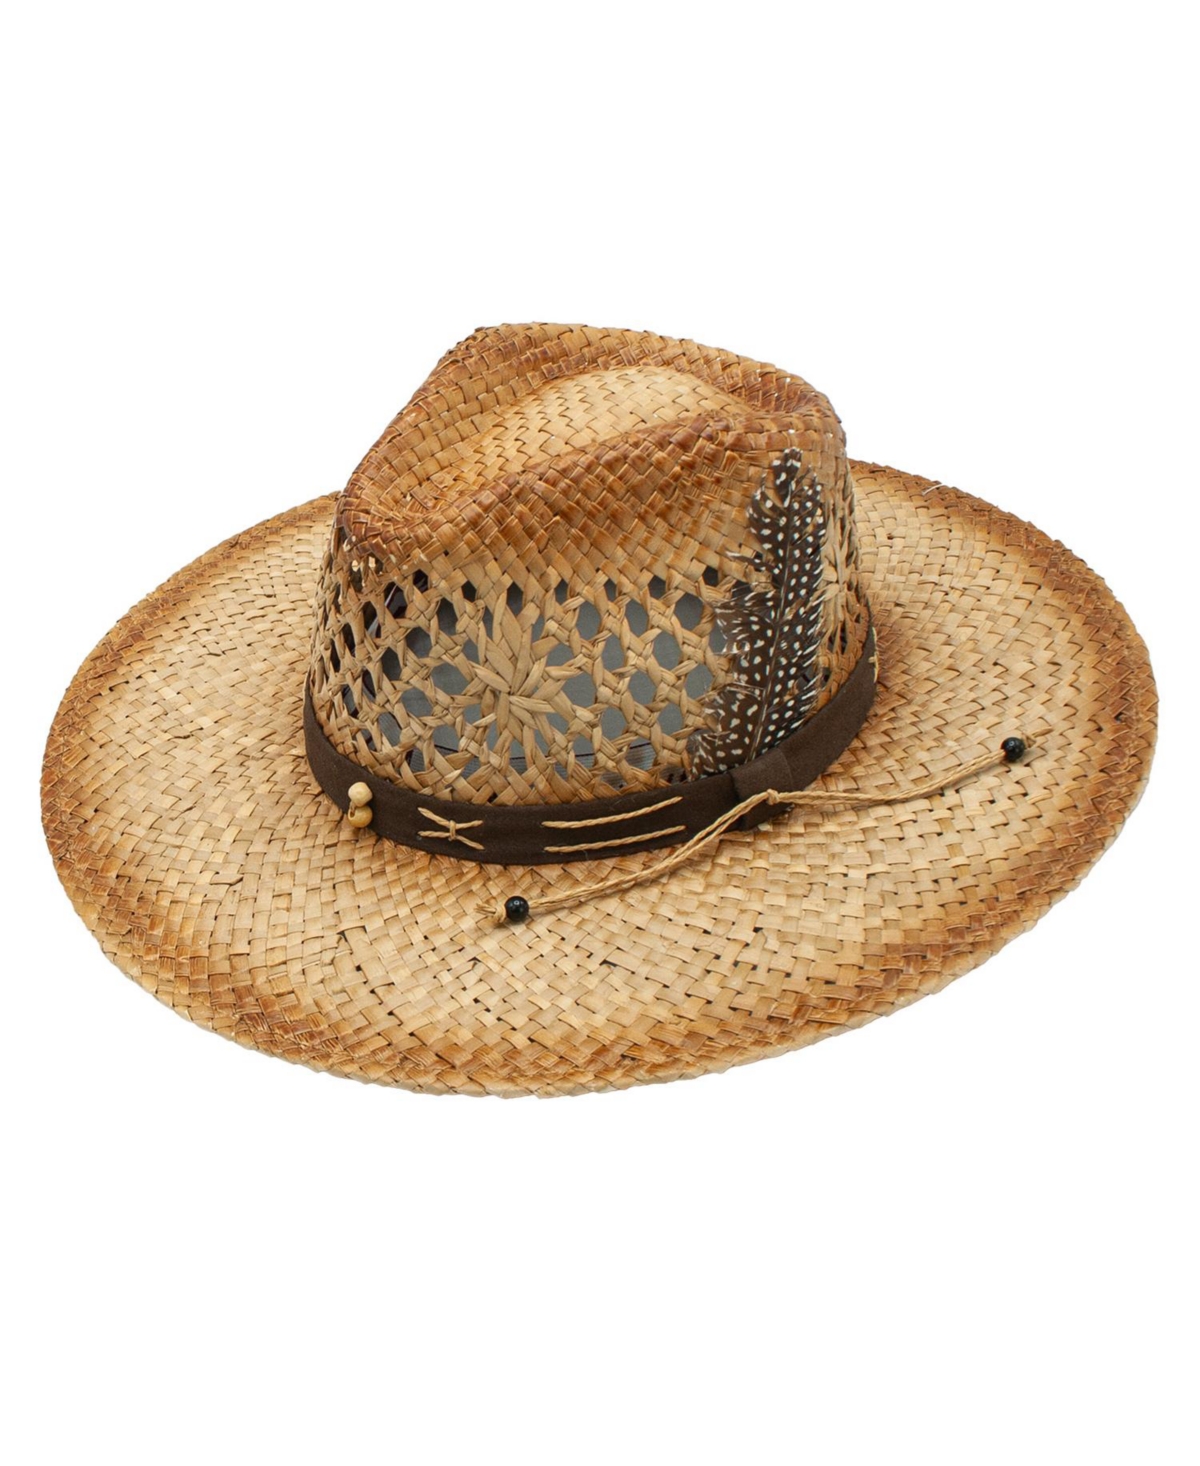 Mexican Feathered Band Straw Hat - Tea stain